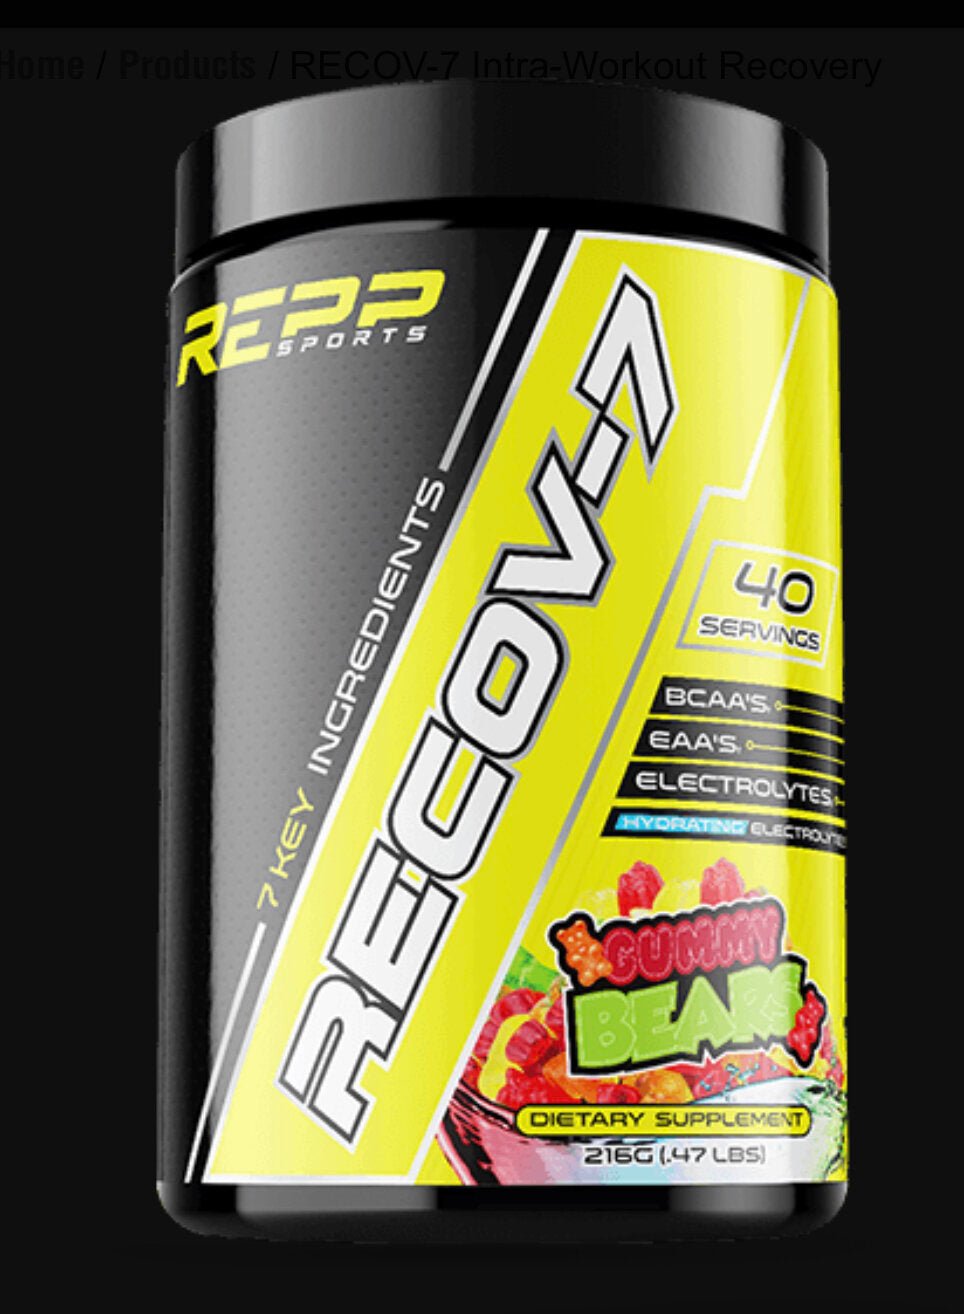 ReppSports- Recov7- Intra Workout Recovery 40 Servings - Krazy Muscle Nutrition vendor-unknownSQ3151024